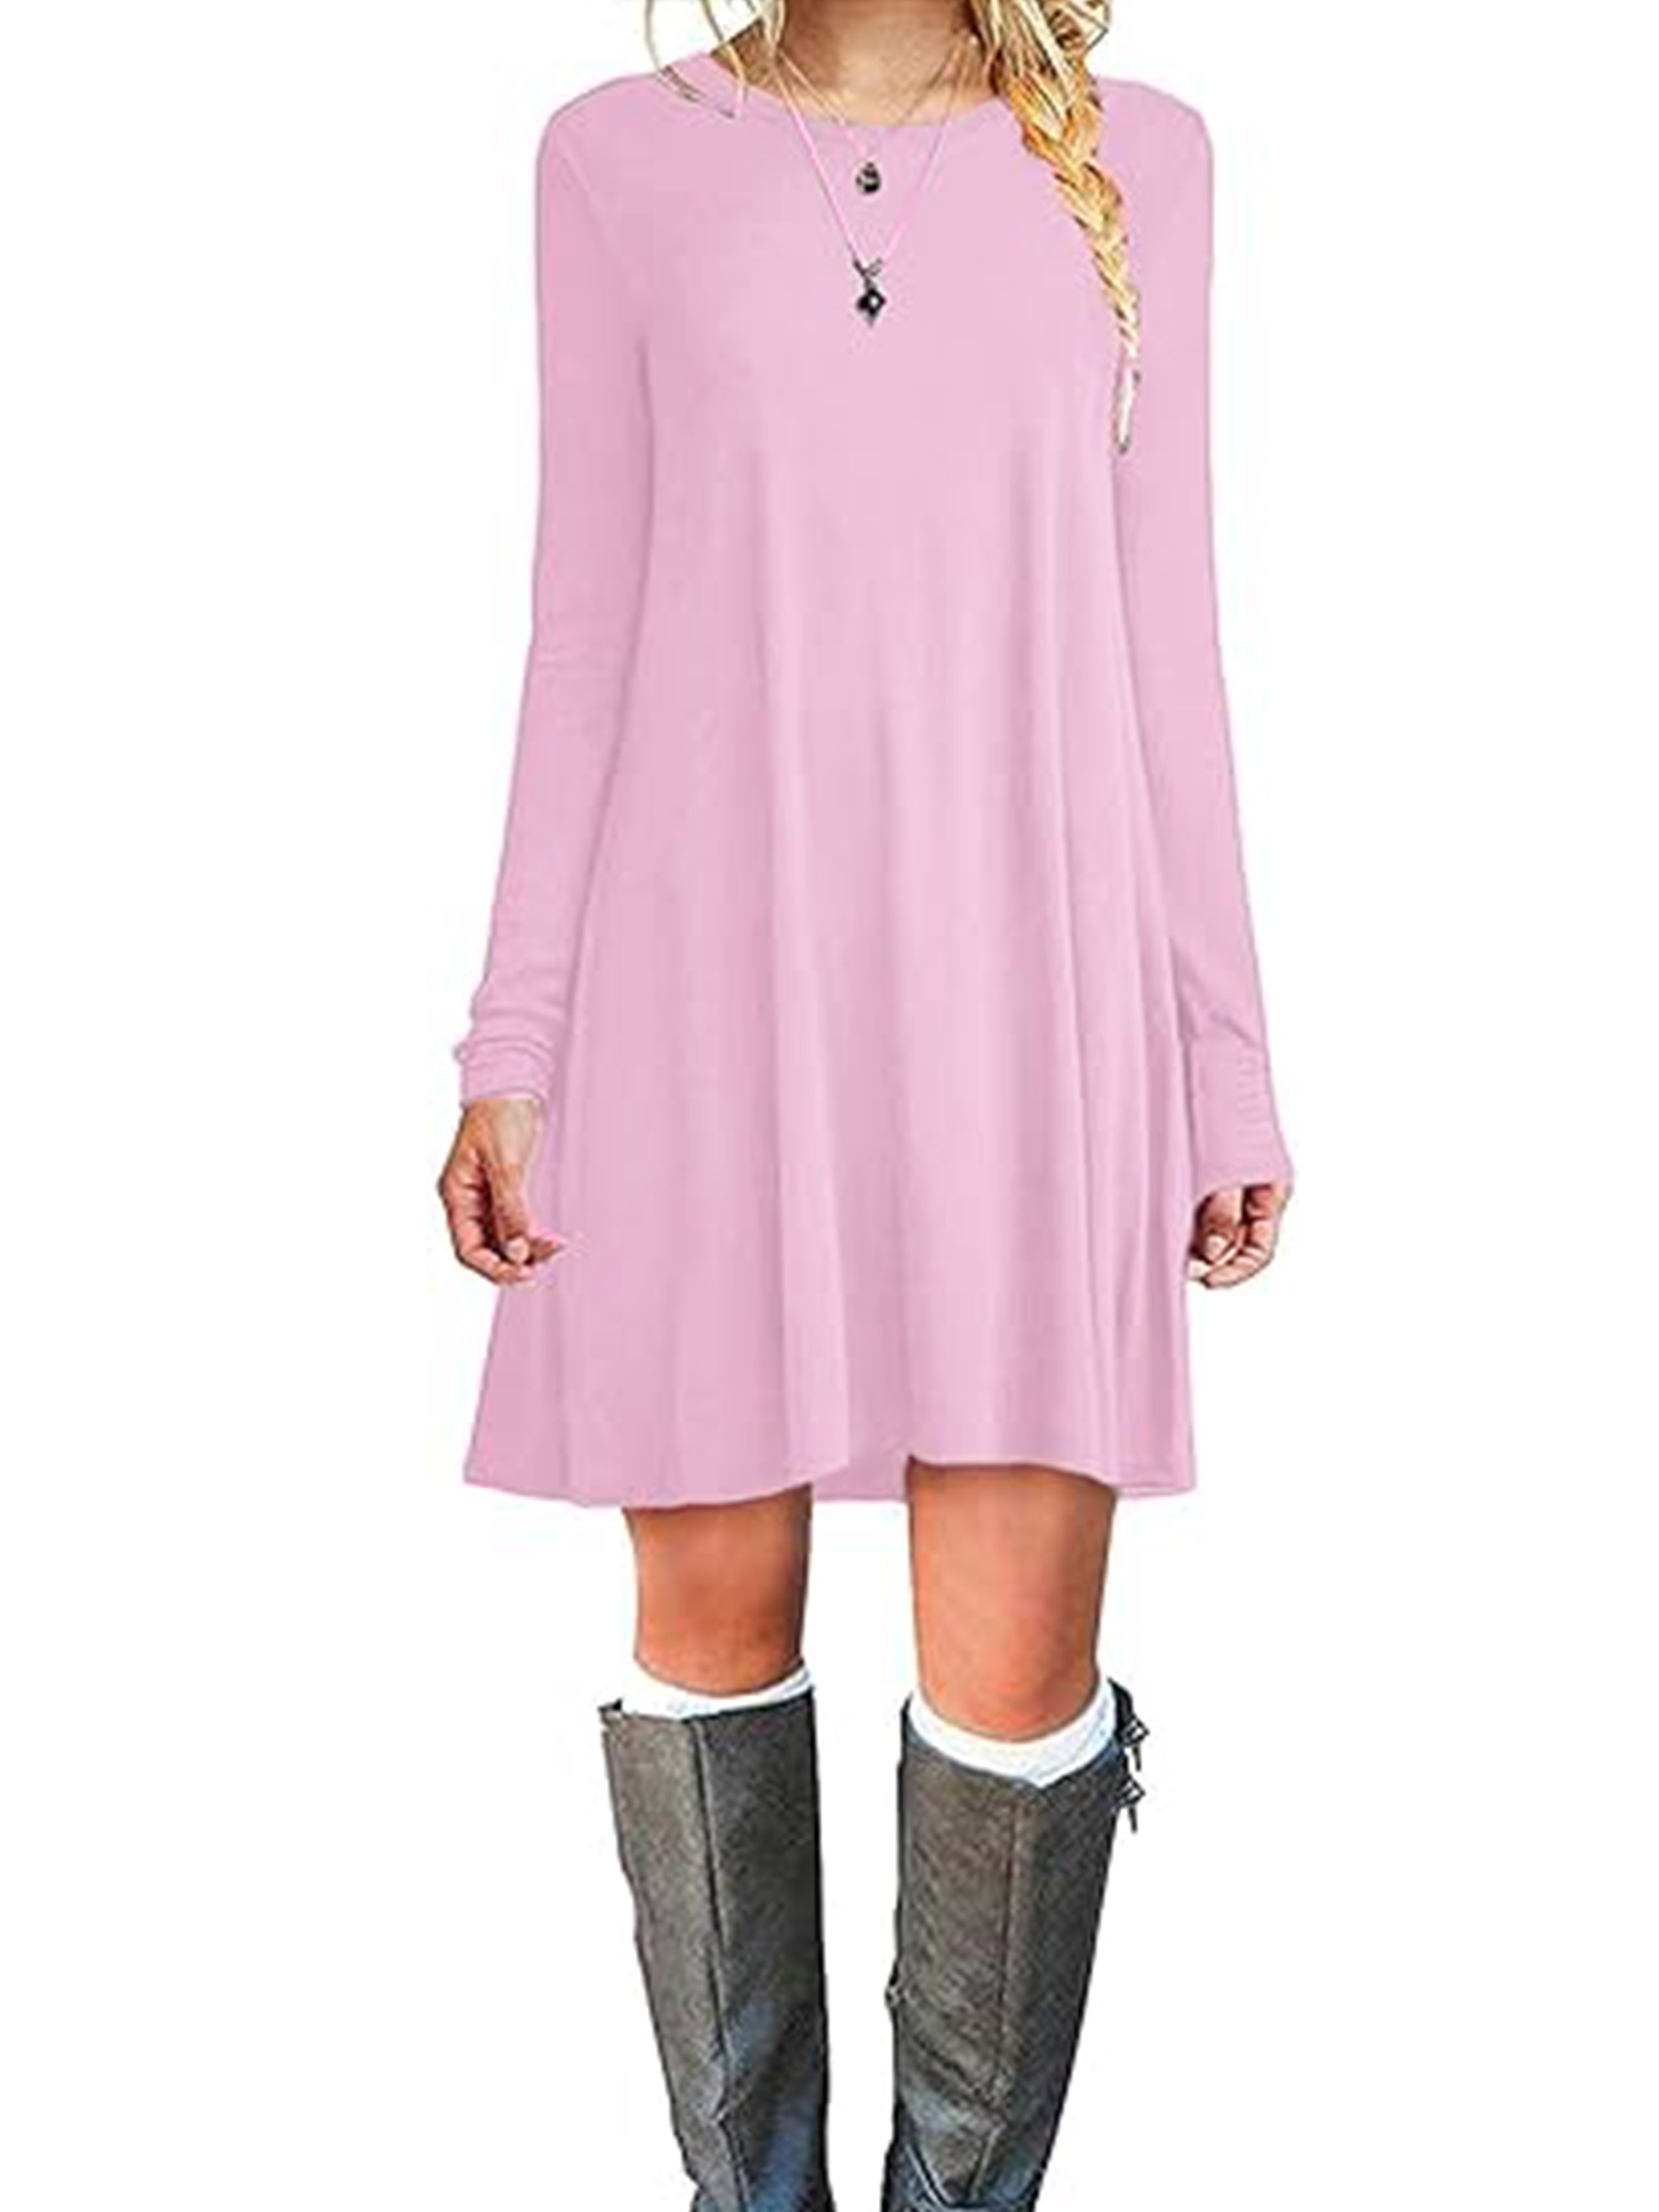 solid crew neck simple dress versatile long sleeve dress for spring fall womens clothing